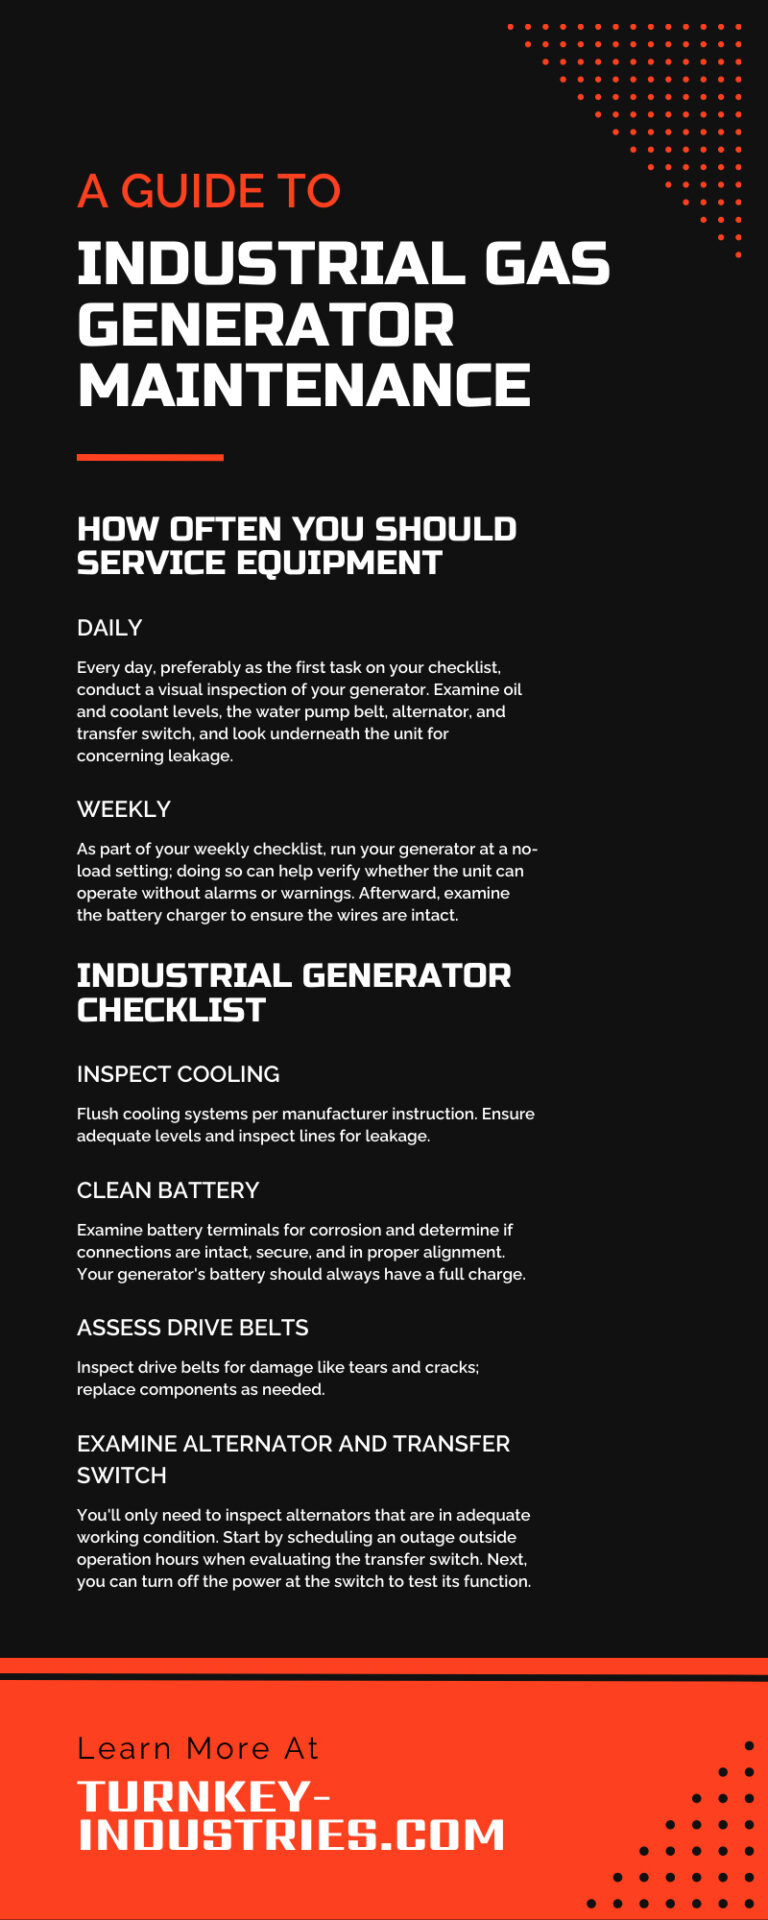 A Guide to Industrial Gas Generator Maintenance